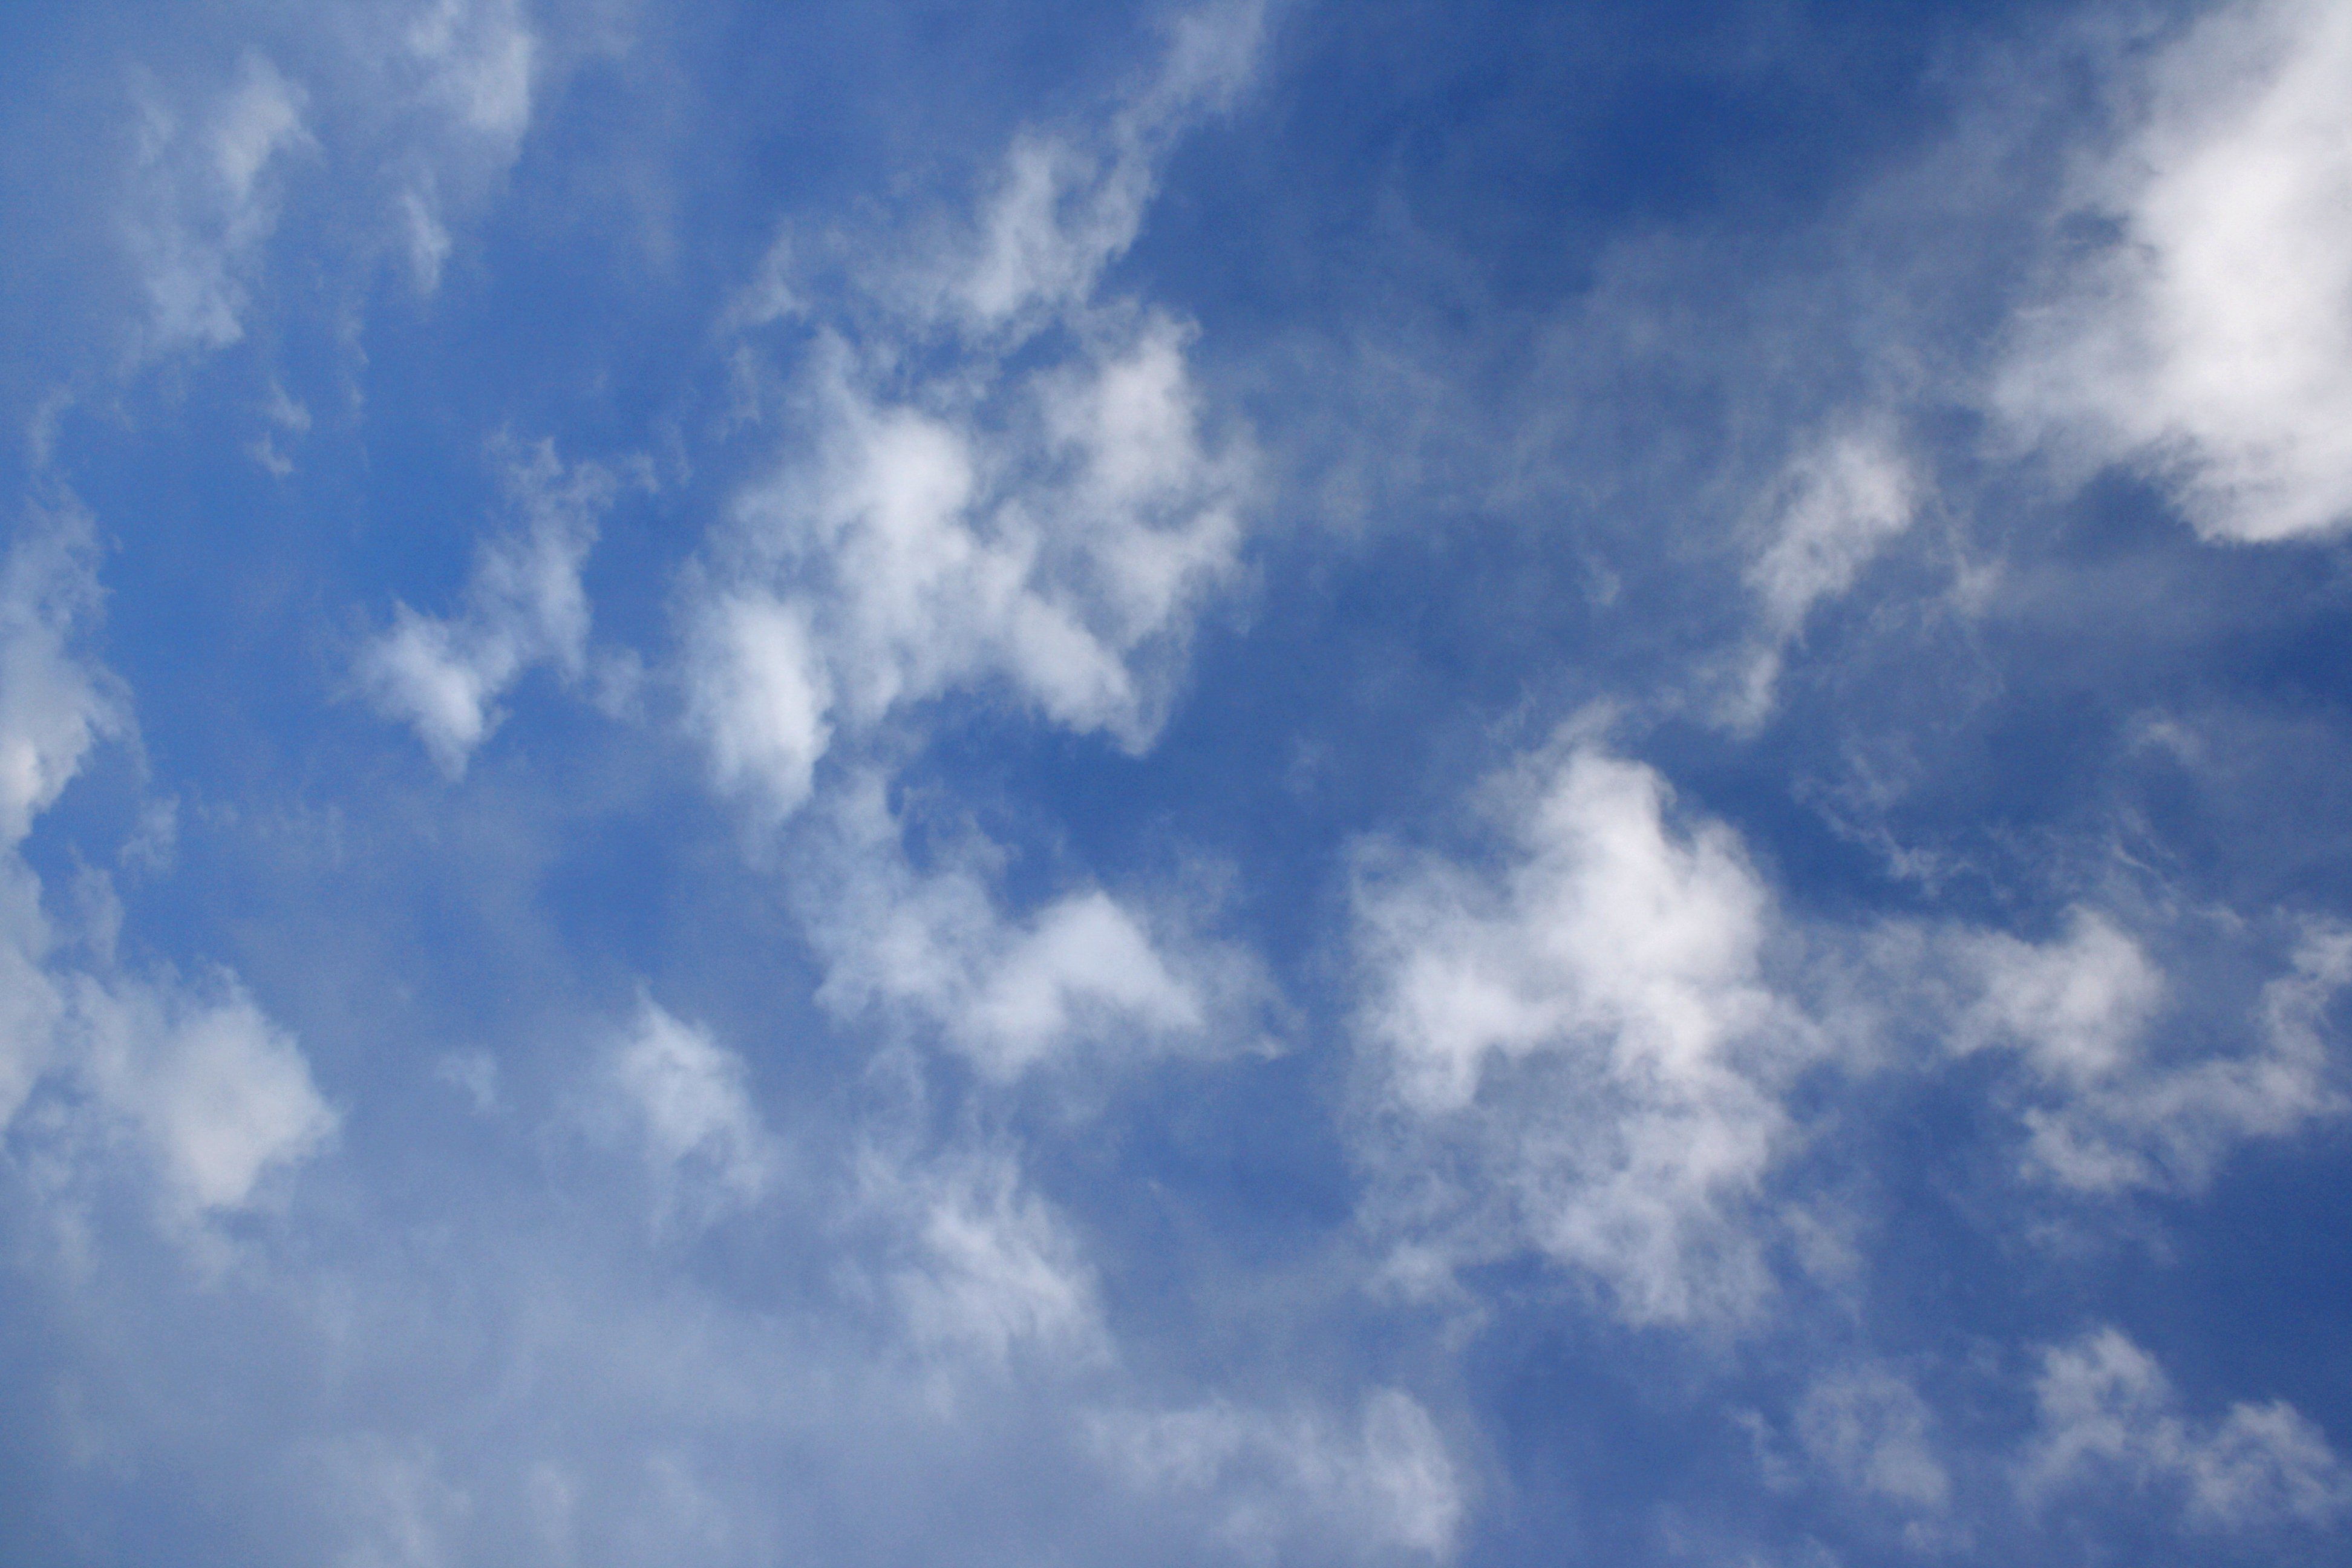 Blue Sky with White Clouds Texture Picture | Free Photograph | Photos ...